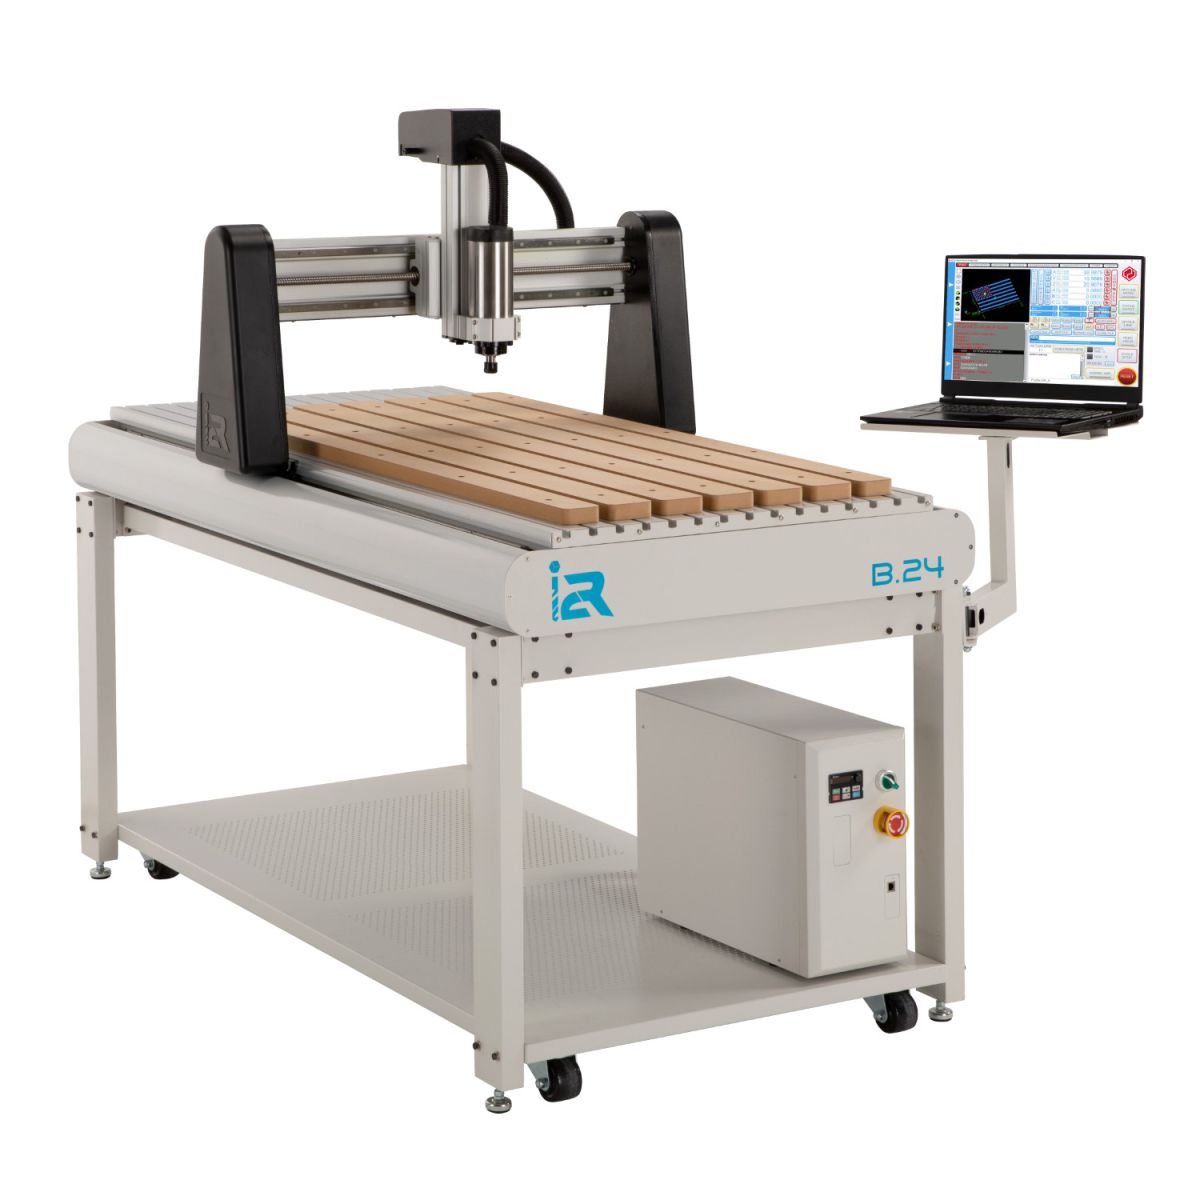 i2rb422 cnc router uccnc ready 610mm x 610mm 15kw spindle er16 included tw 8459611000